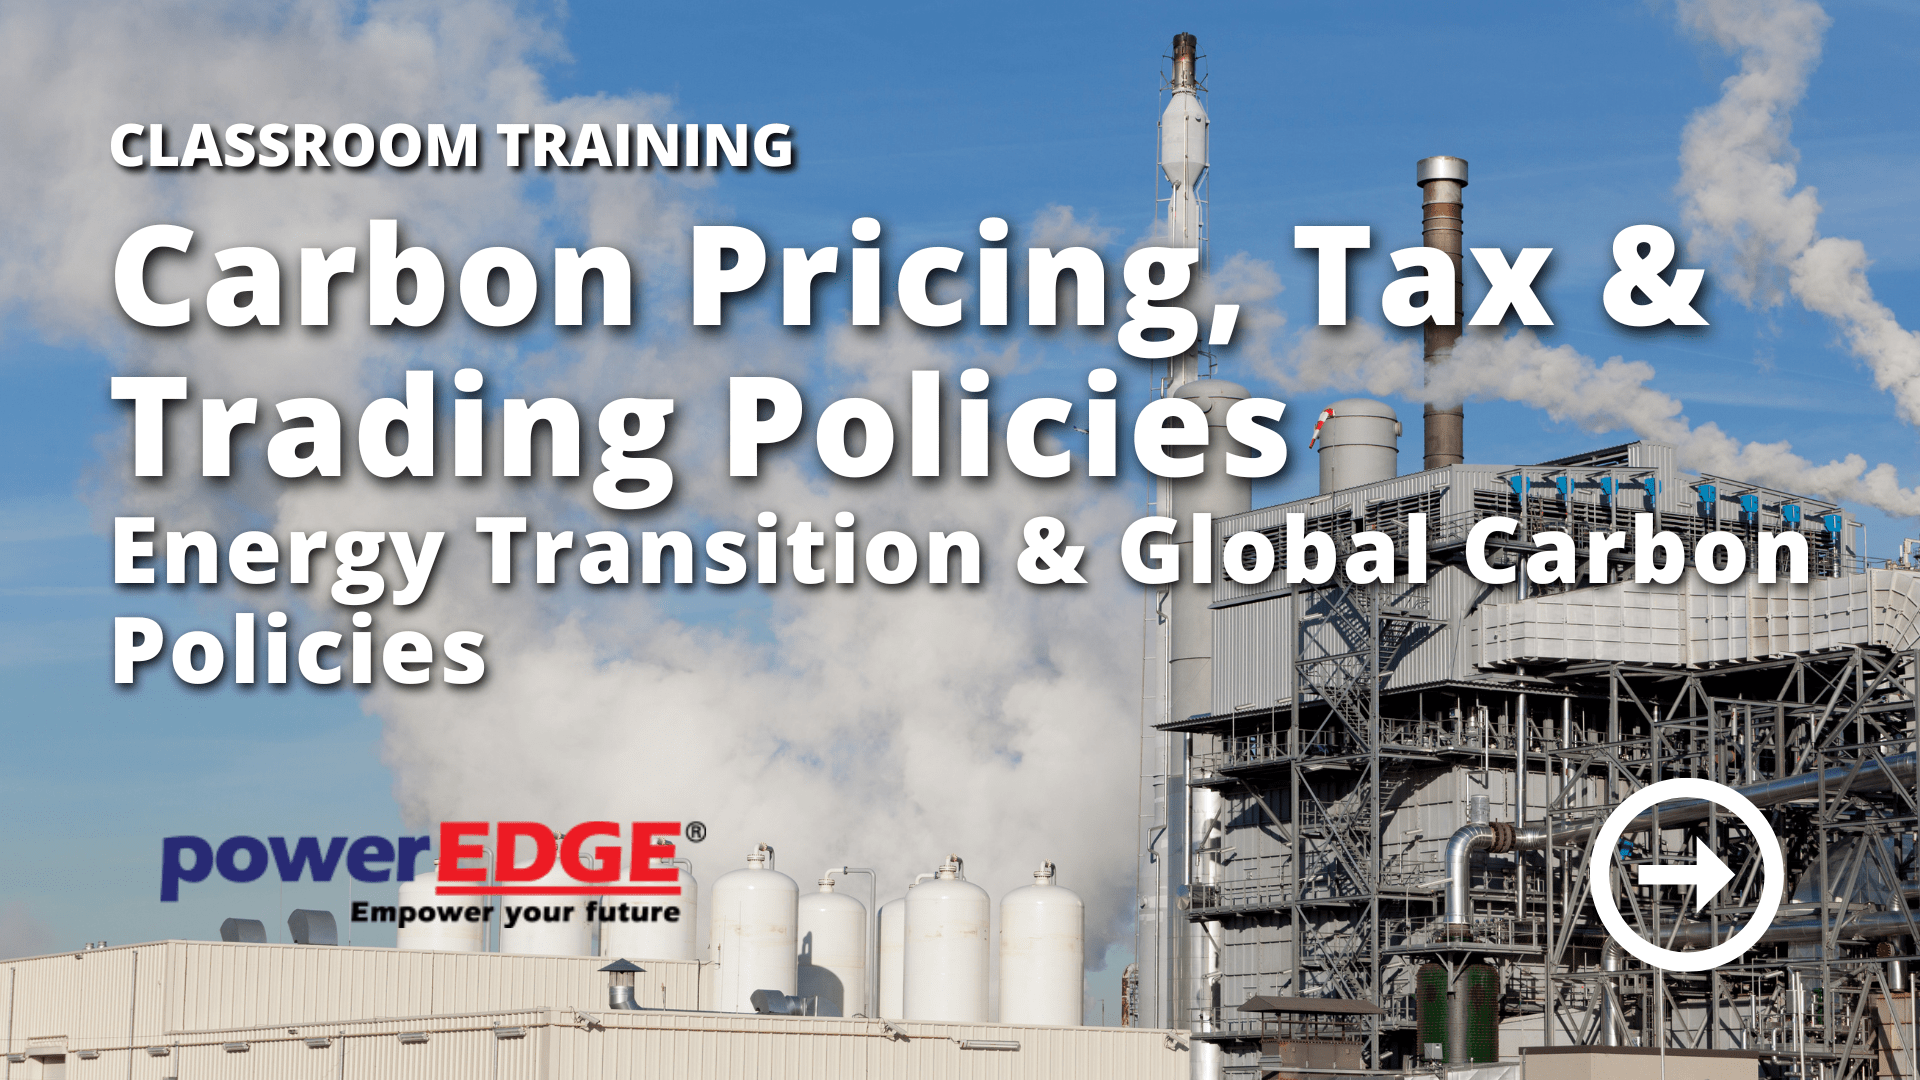 Classroom Carbon Pricing Tax Trading Policies Energy Transition Global Carbon Policies Min 